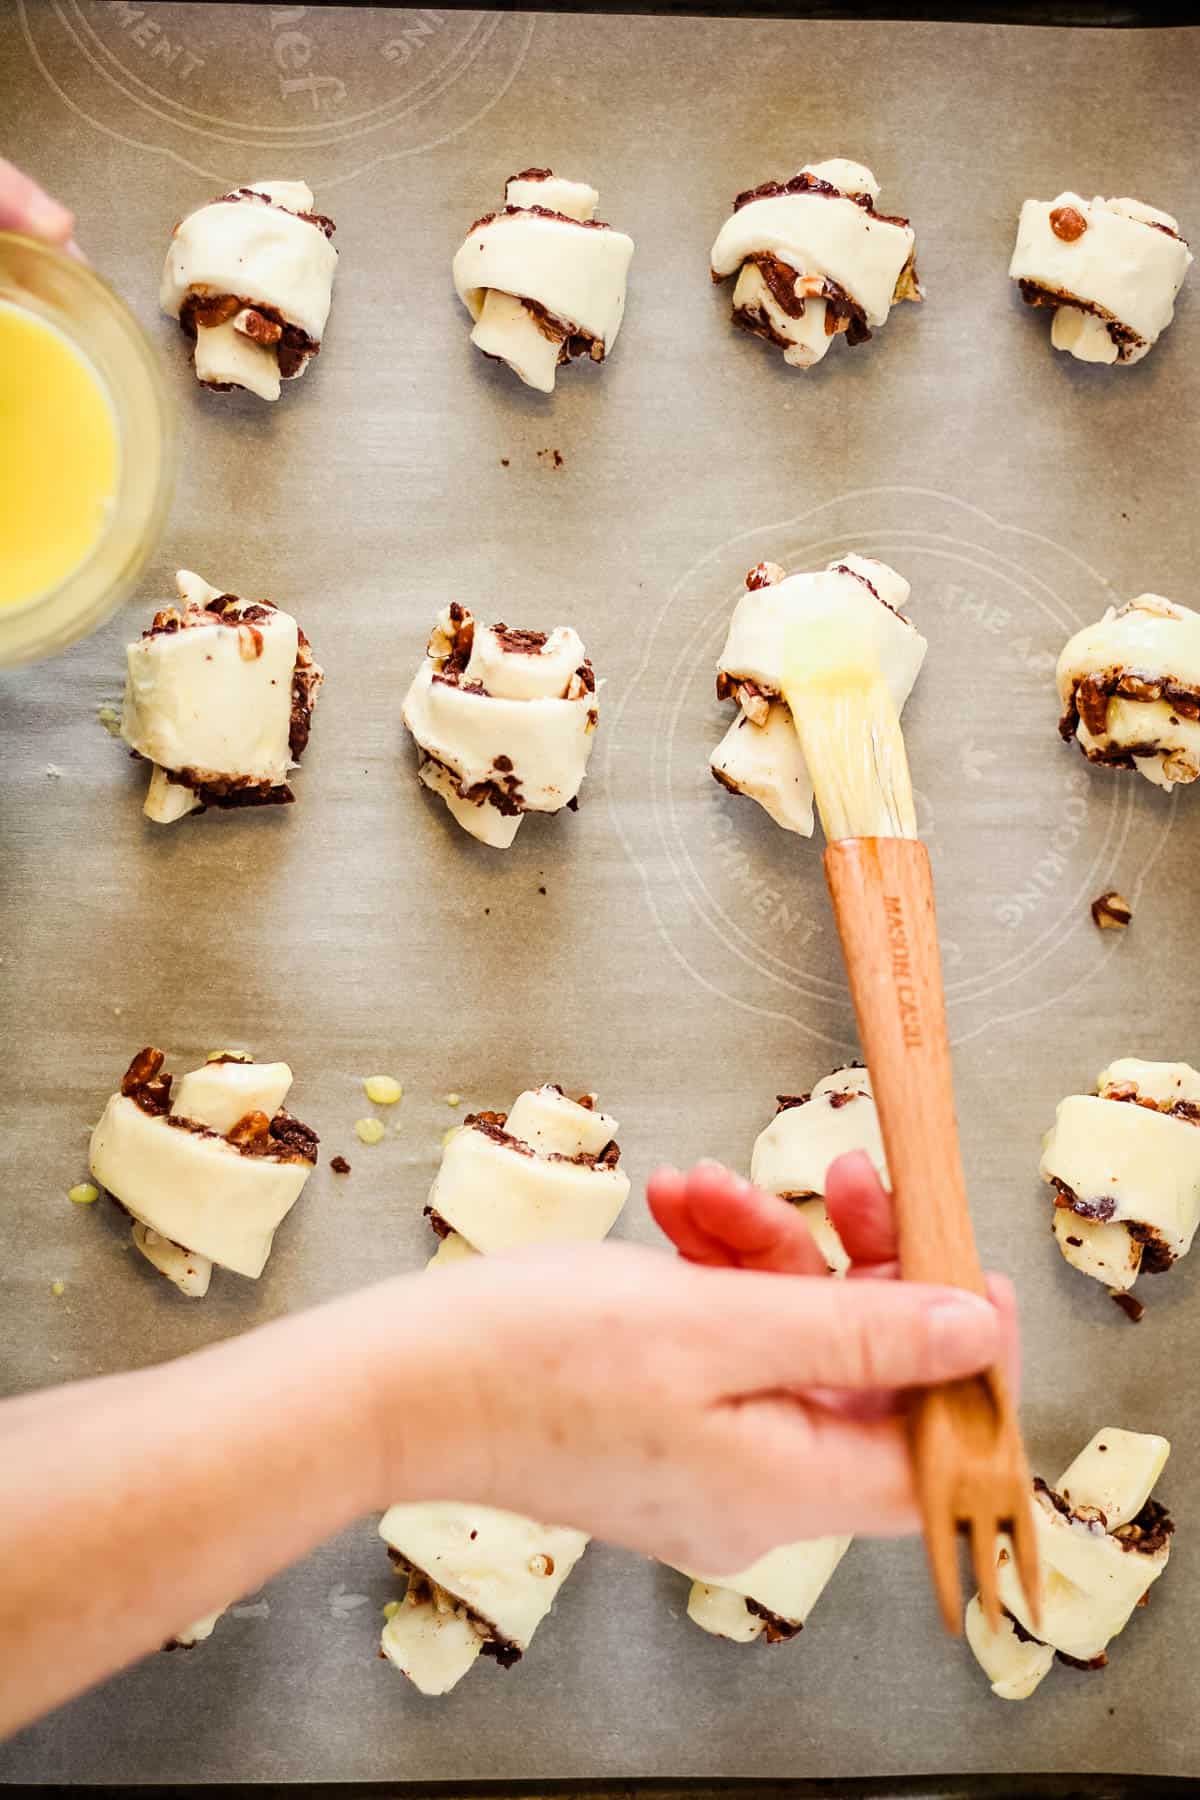 A person is dipping a wooden spoon into rugelach dough on a baking sheet.